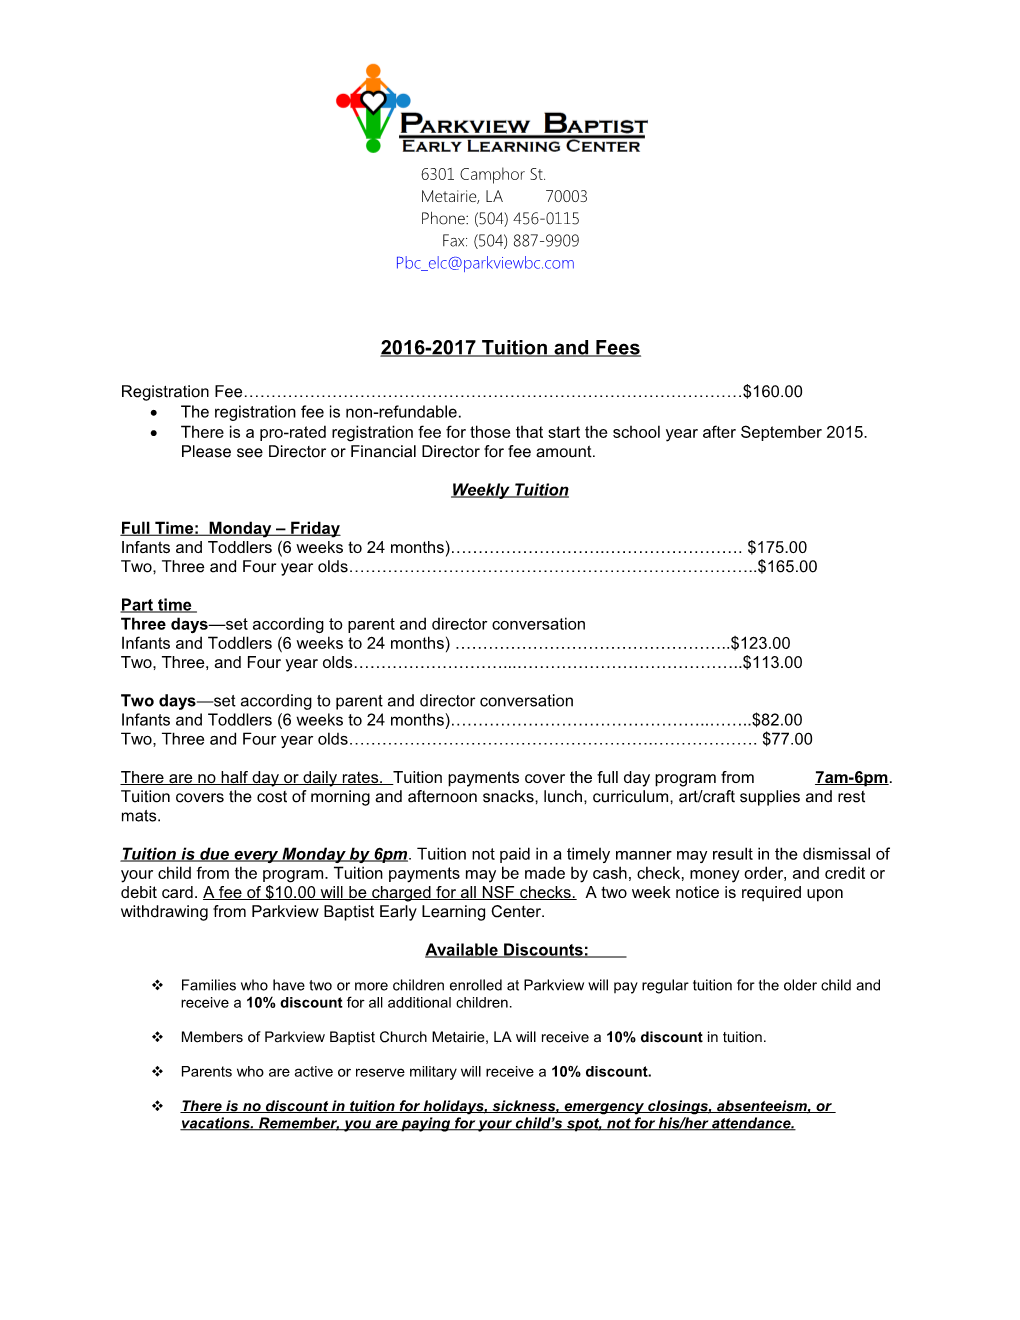 2016-2017 Tuition and Fees